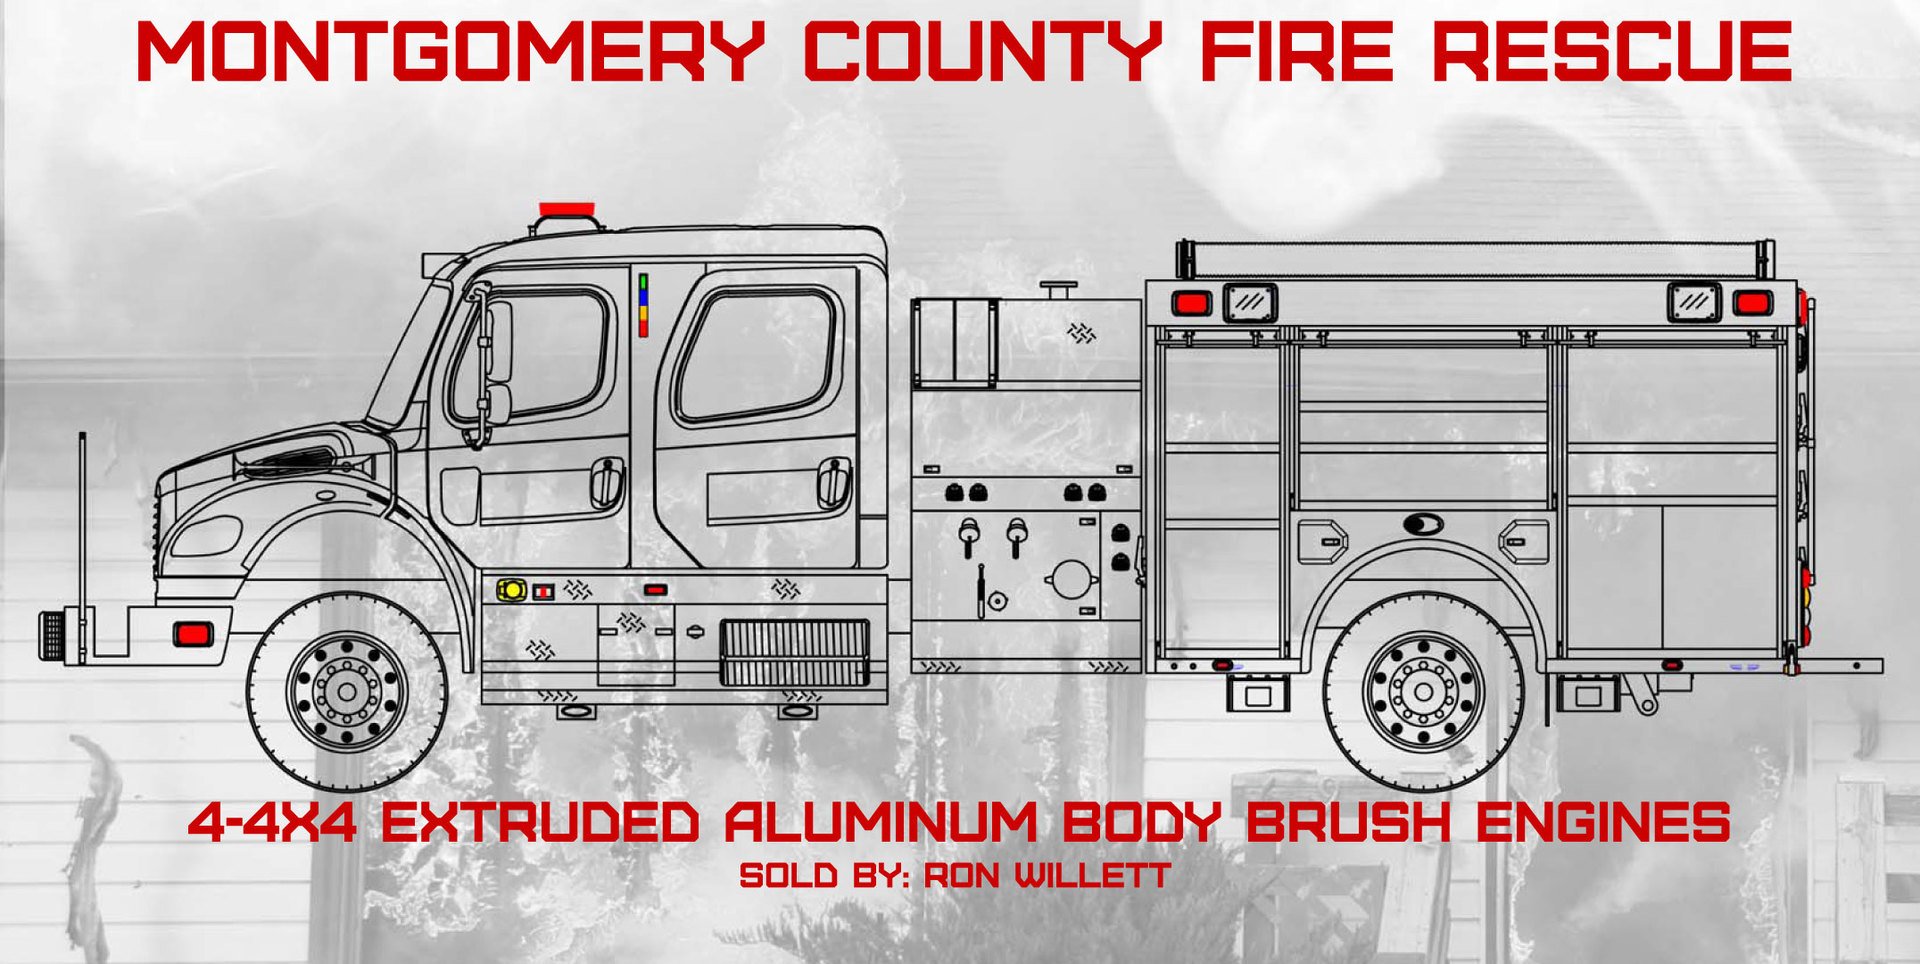 Featured image for “Montgomery County Fire Rescue”